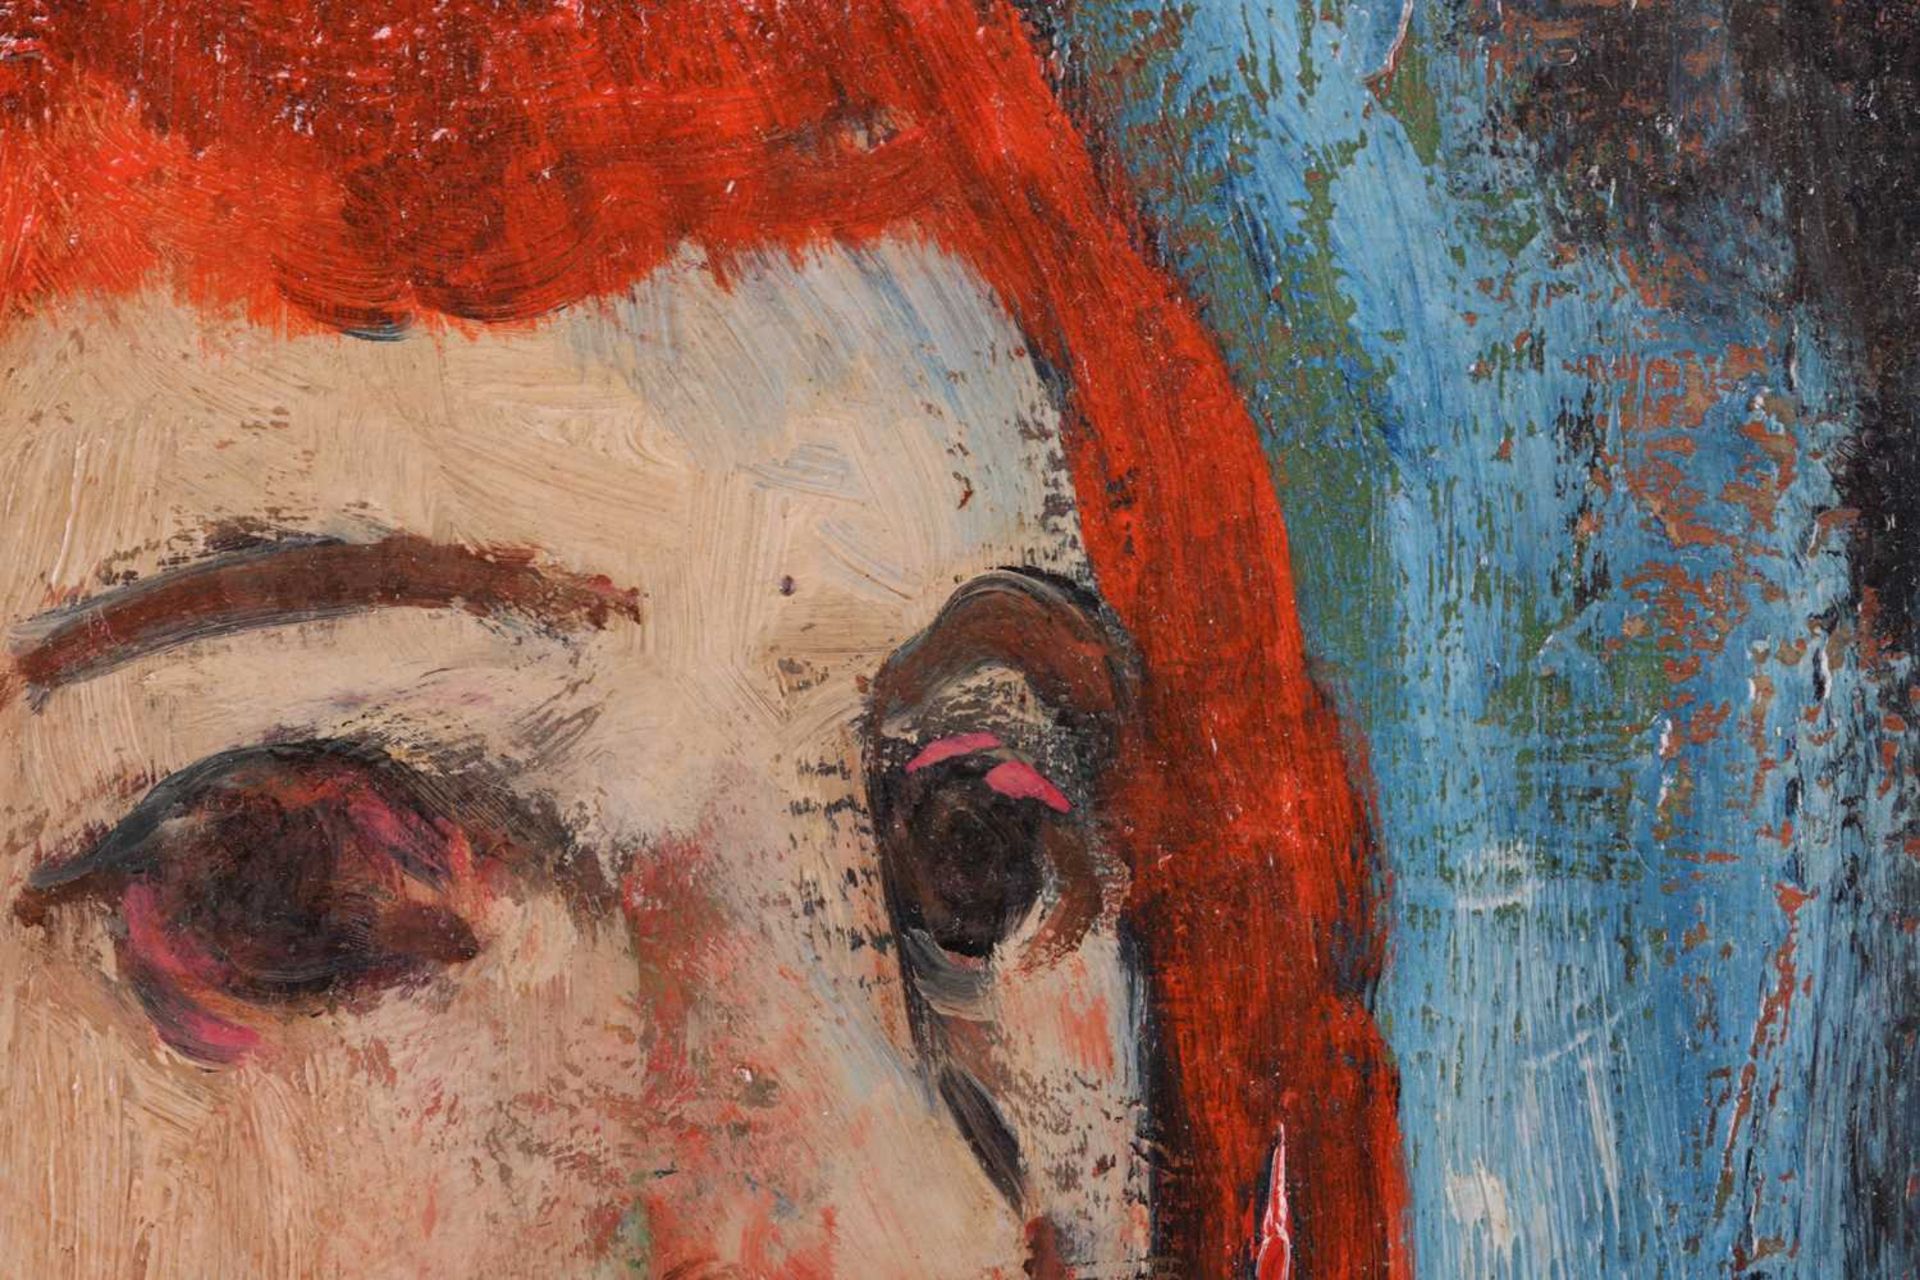 Reg Gammon (1894-1997), 'Girl with Red Hair', signed 'Gammon' (lower left), oil on board, 39 x 27 cm - Image 5 of 8